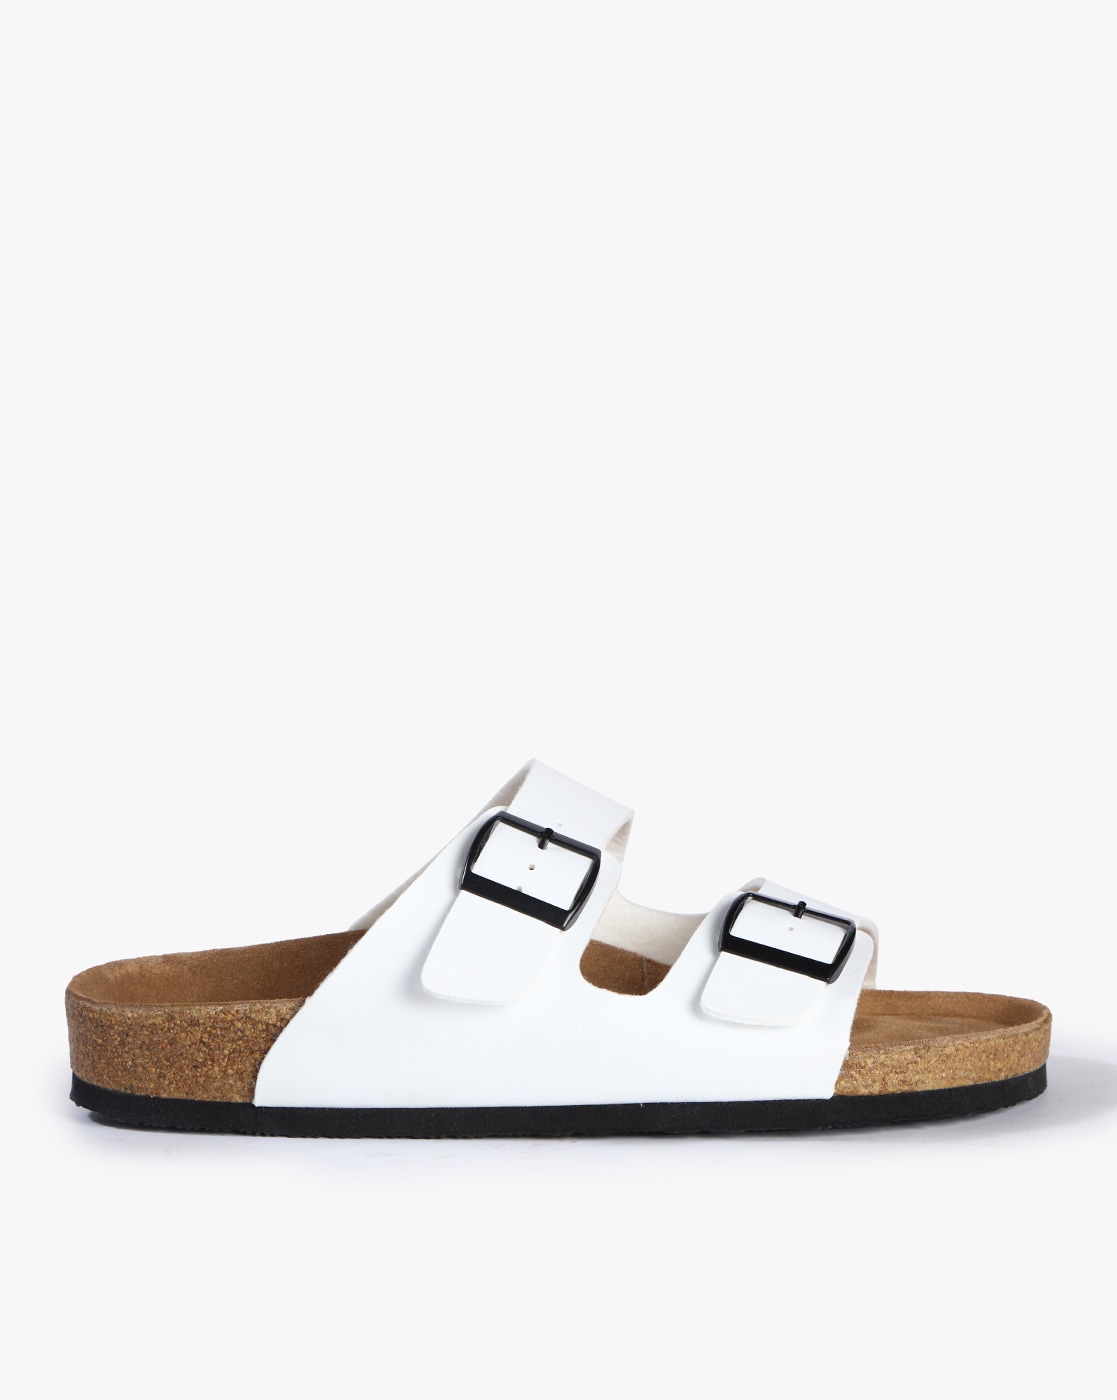 Buy White Sandals for Men by RUOSH 